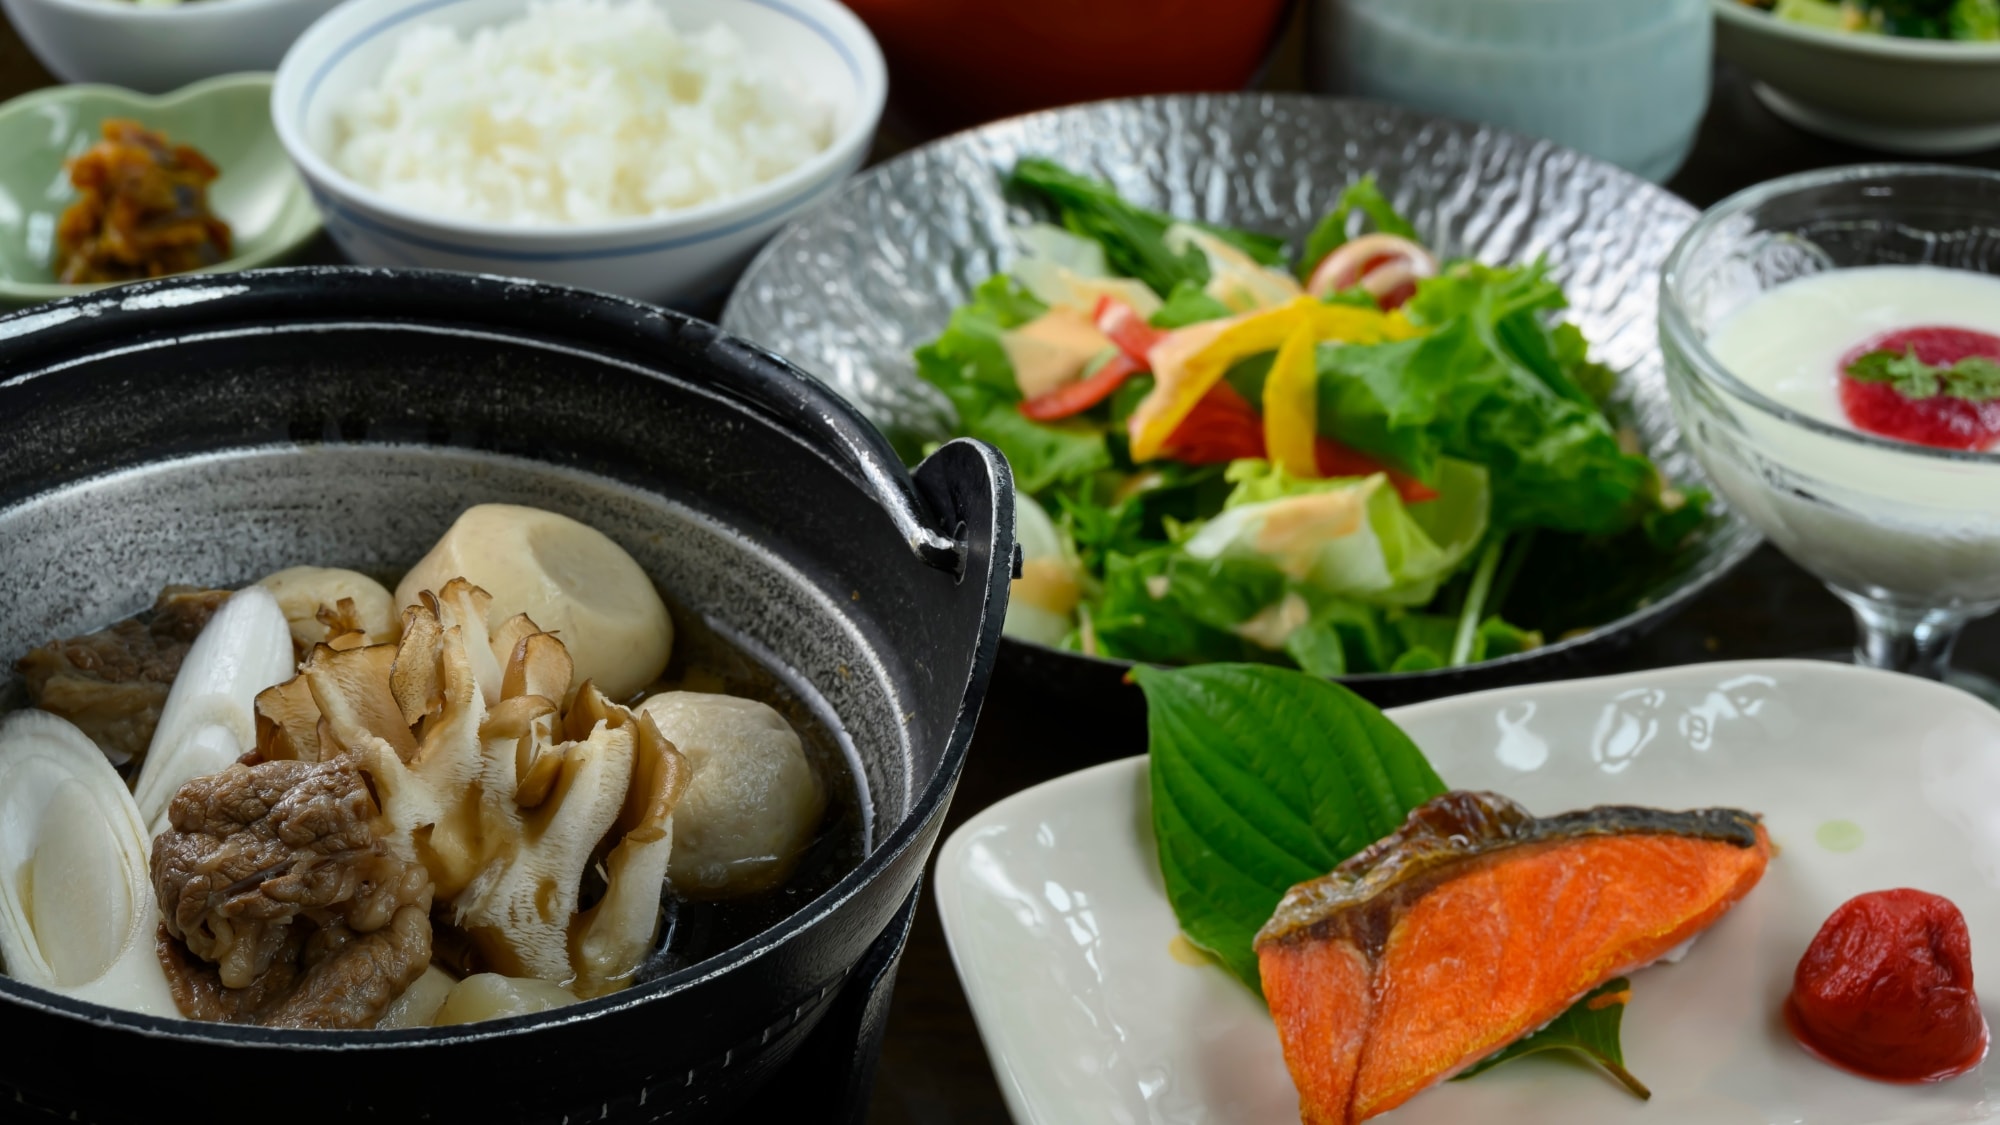 [Summer Breakfast] This is an example of a summer breakfast that includes Yamagata's local cuisine such as "Imoni Nabe" and "Dashi".